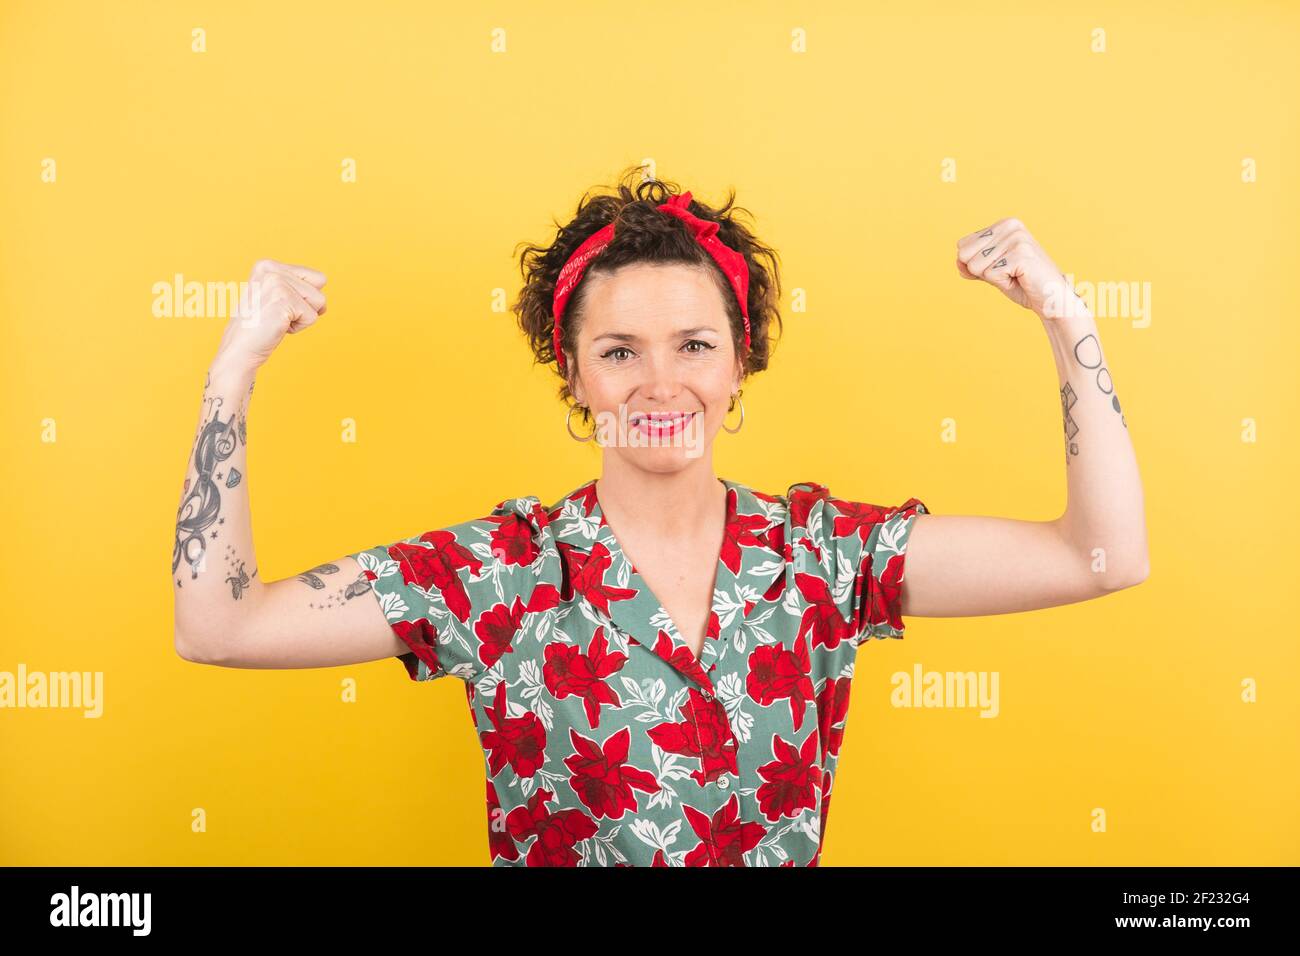 Valladolid, Spain: March 1, 2021: A woman shows her strength with her arms in a feminist gesture Stock Photo